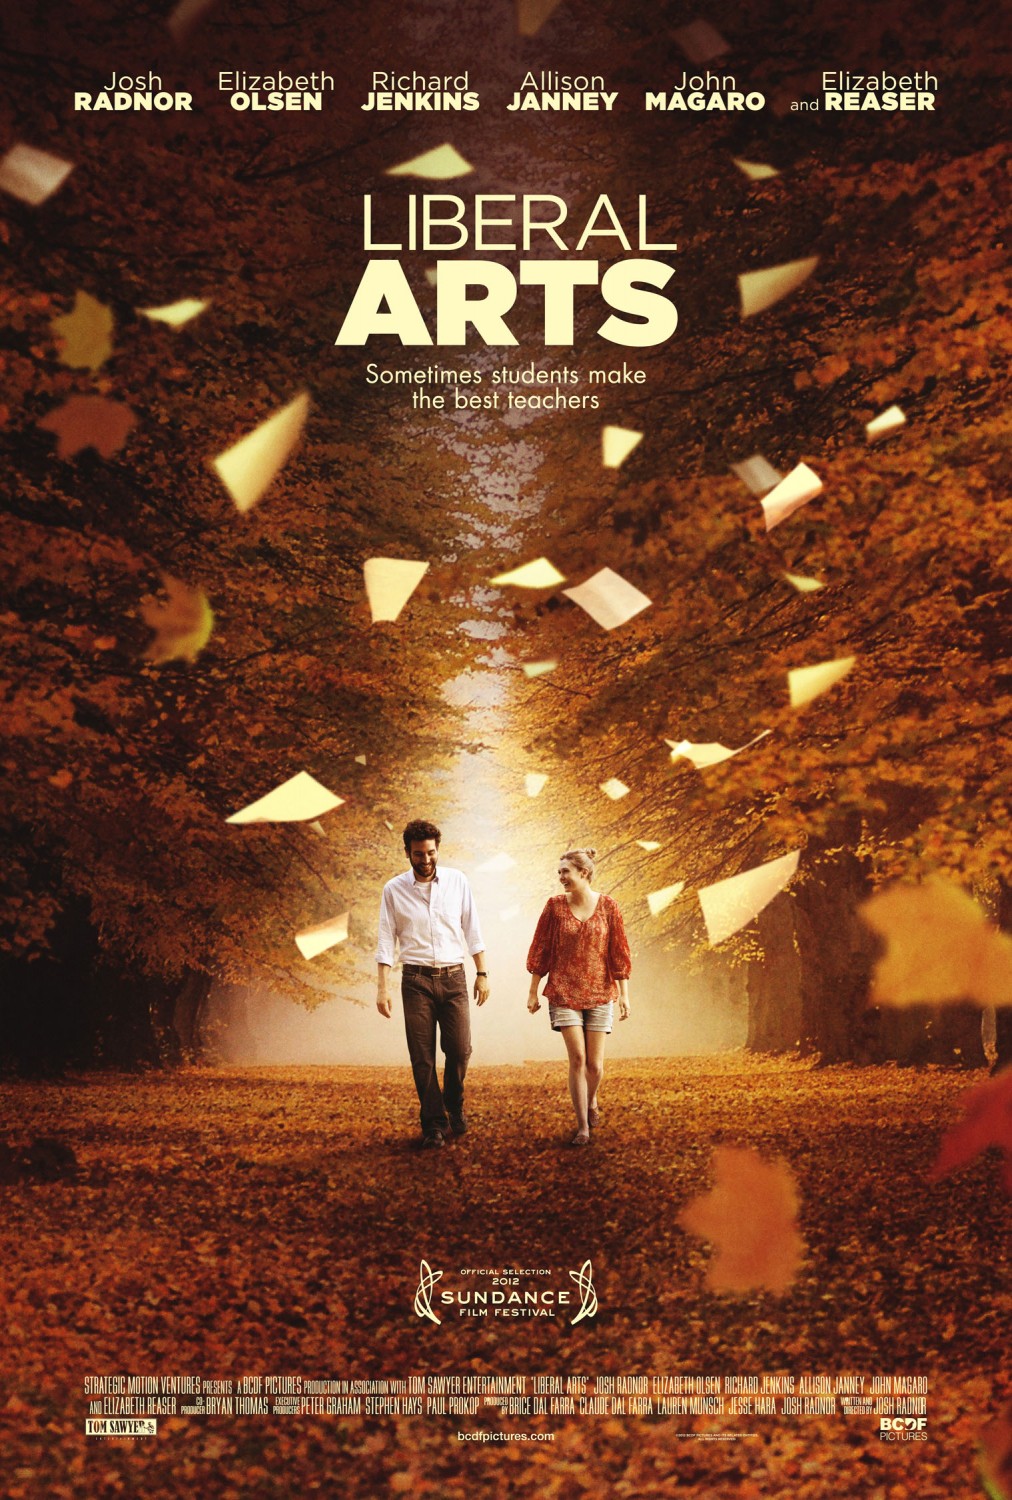 Liberal Arts (#1 of 3): Extra Large Movie Poster Image - IMP Awards